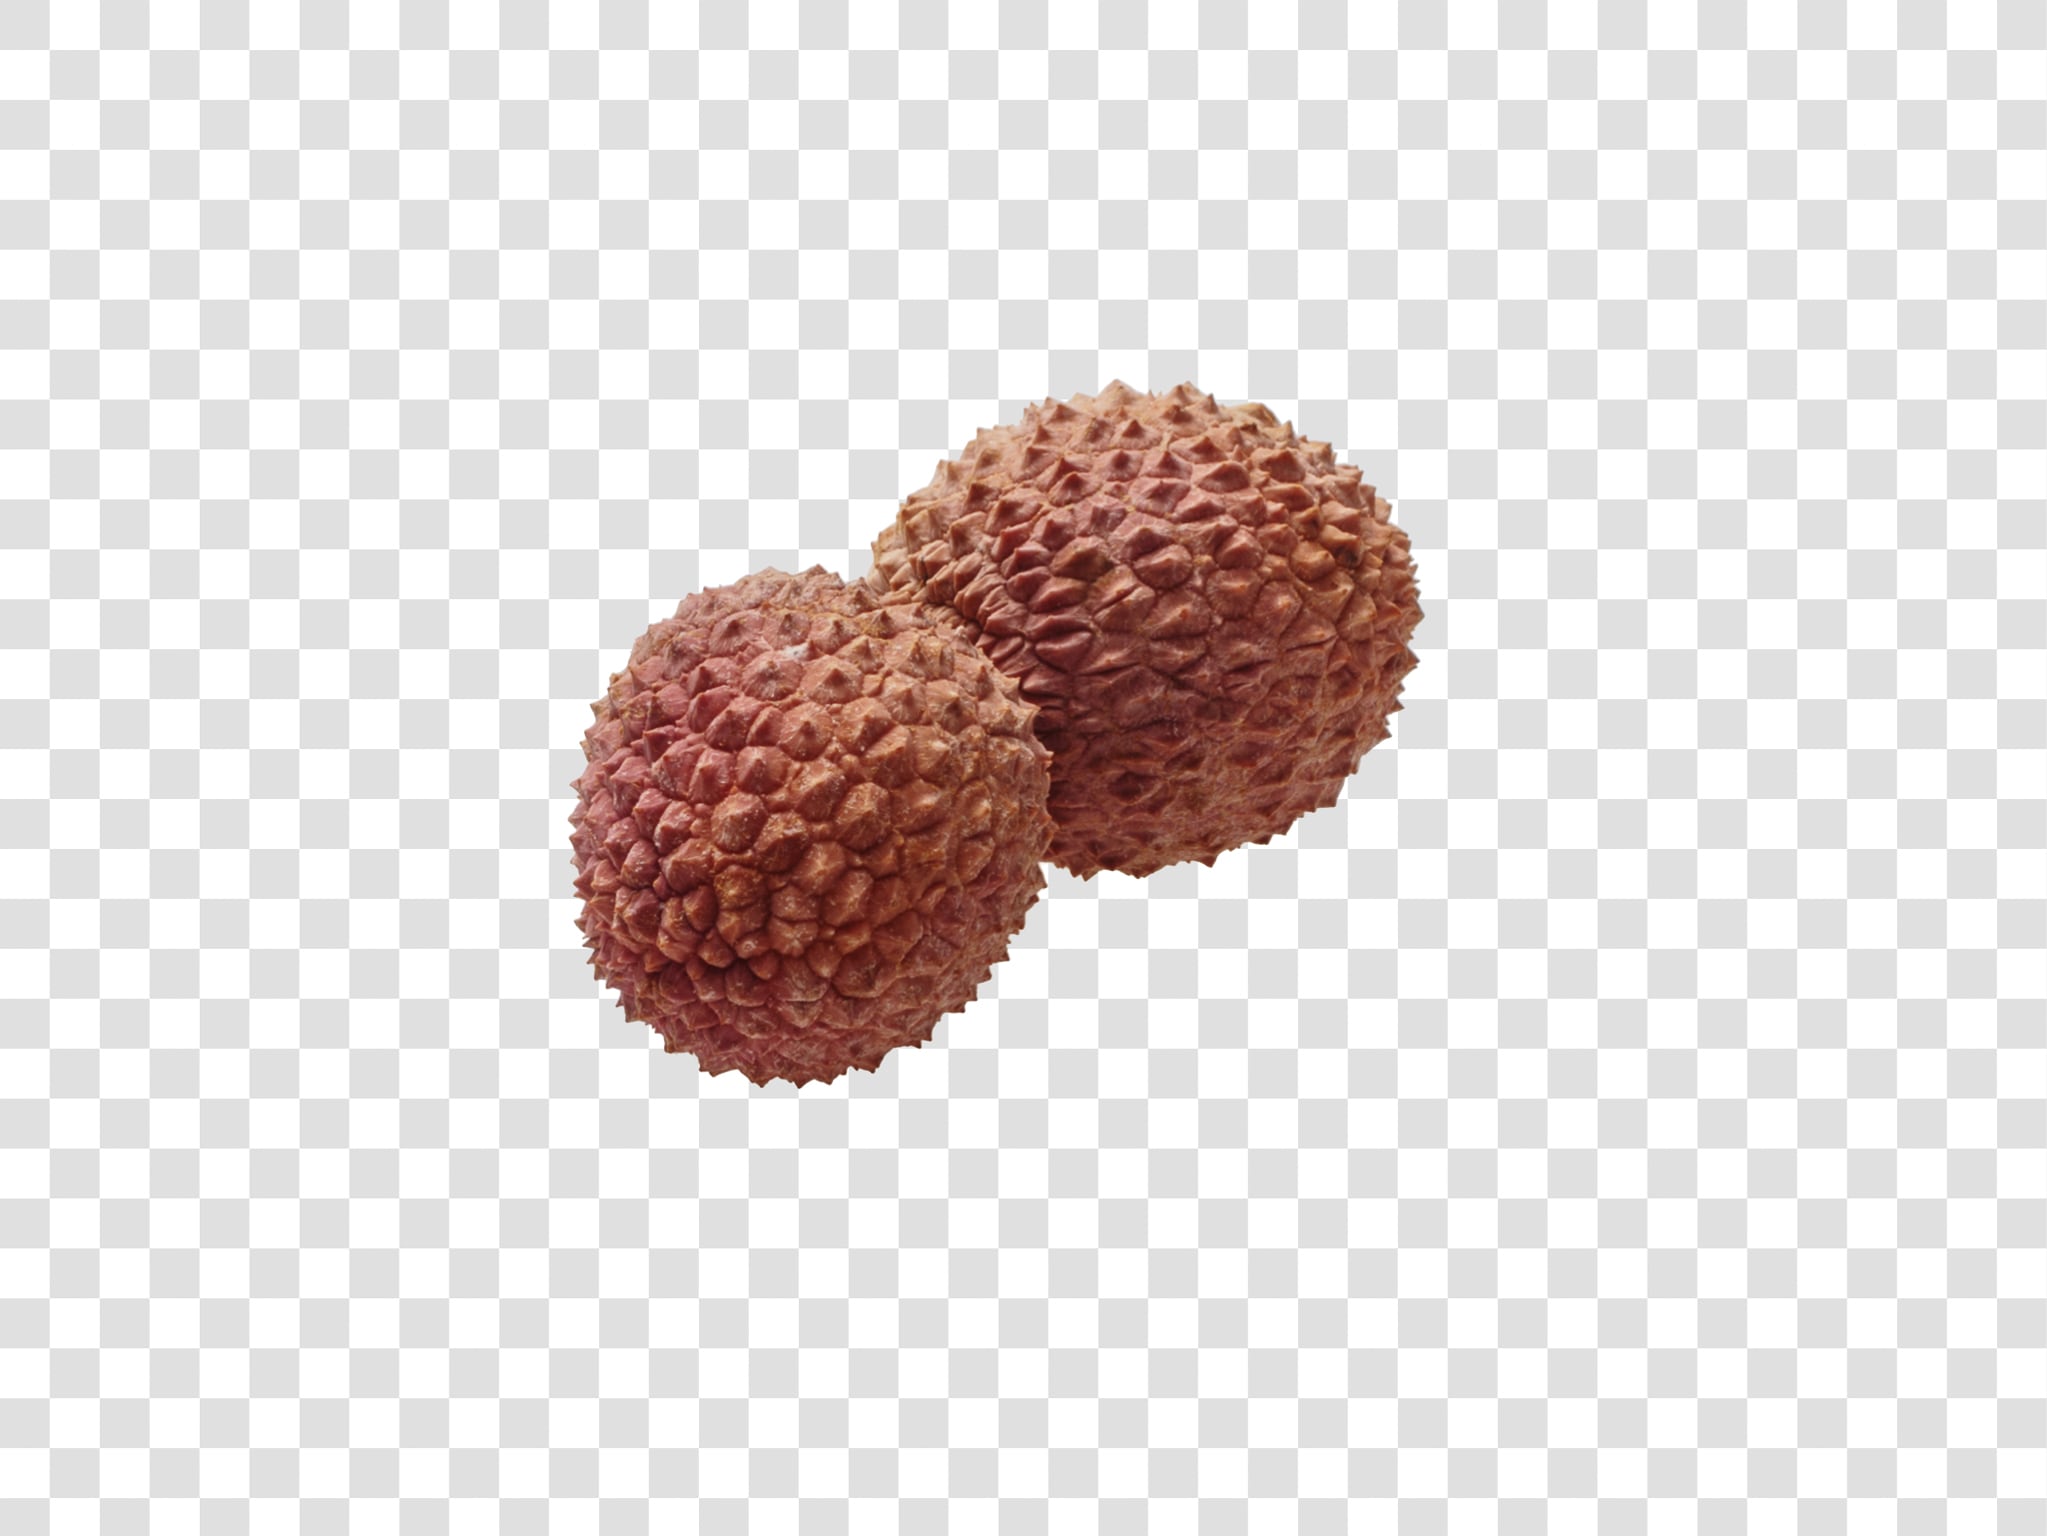 Lychee image asset with transparent background